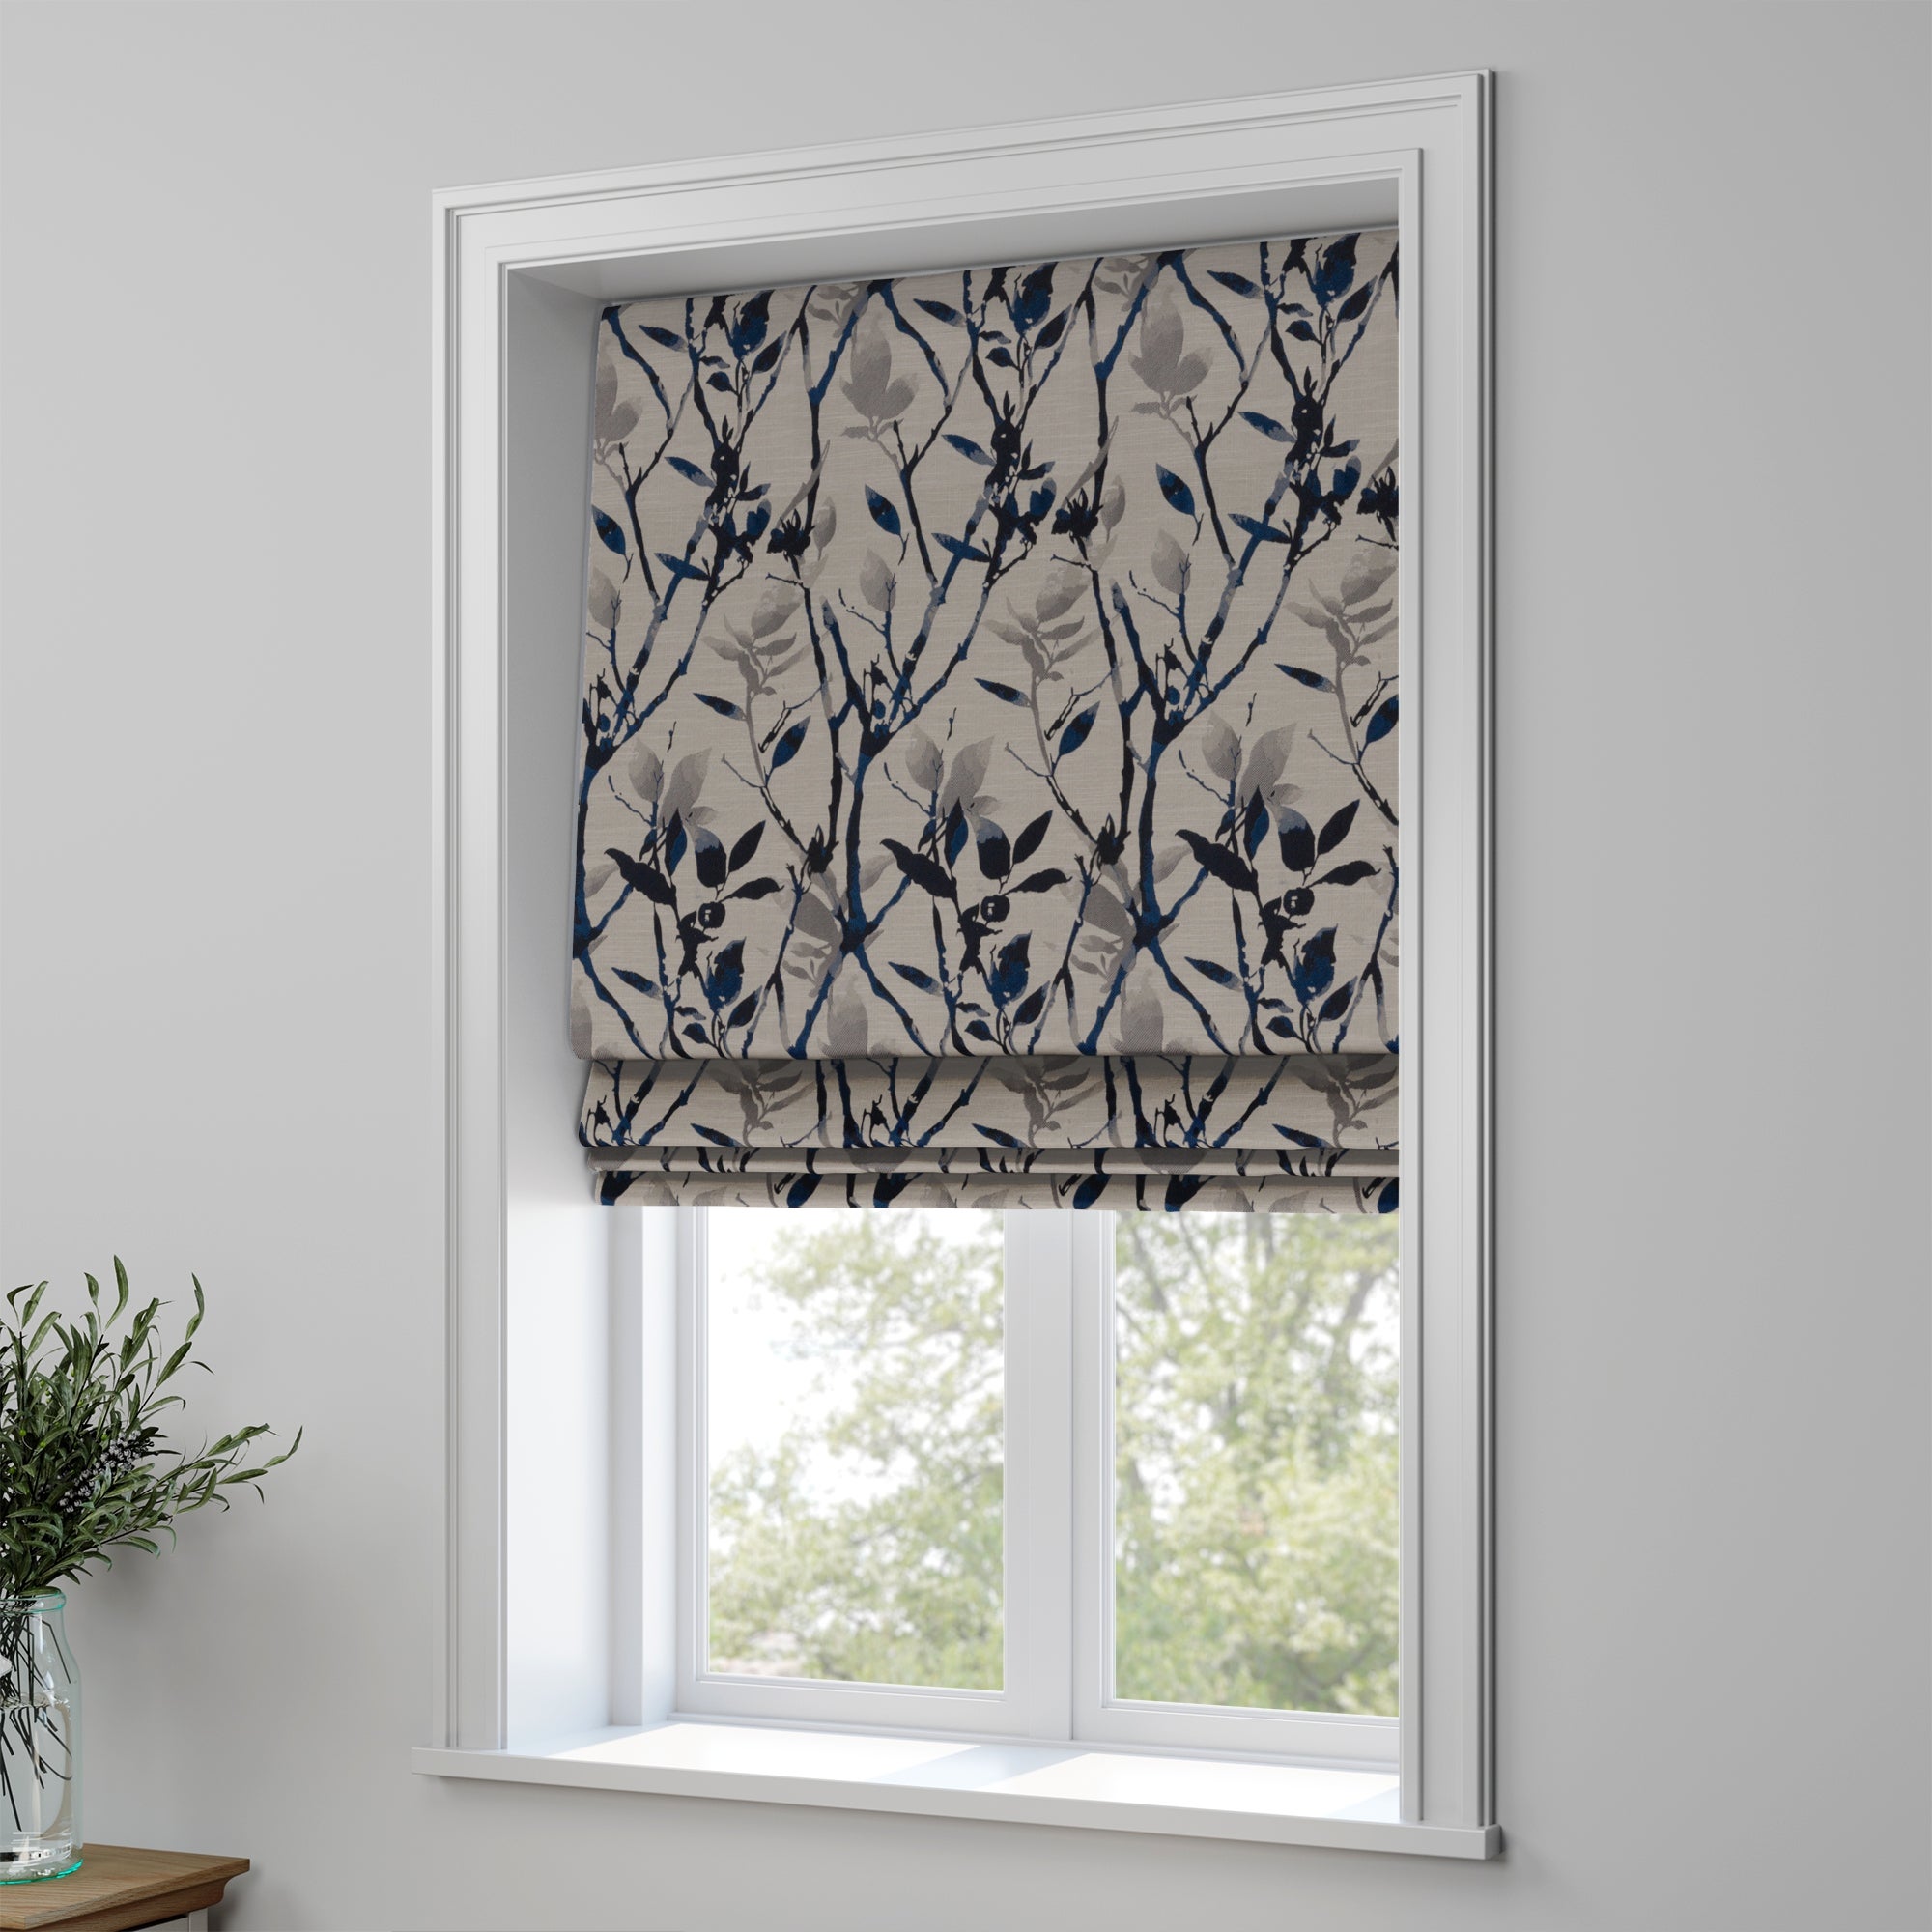 Montague Made to Measure Roman Blind Montague Navy